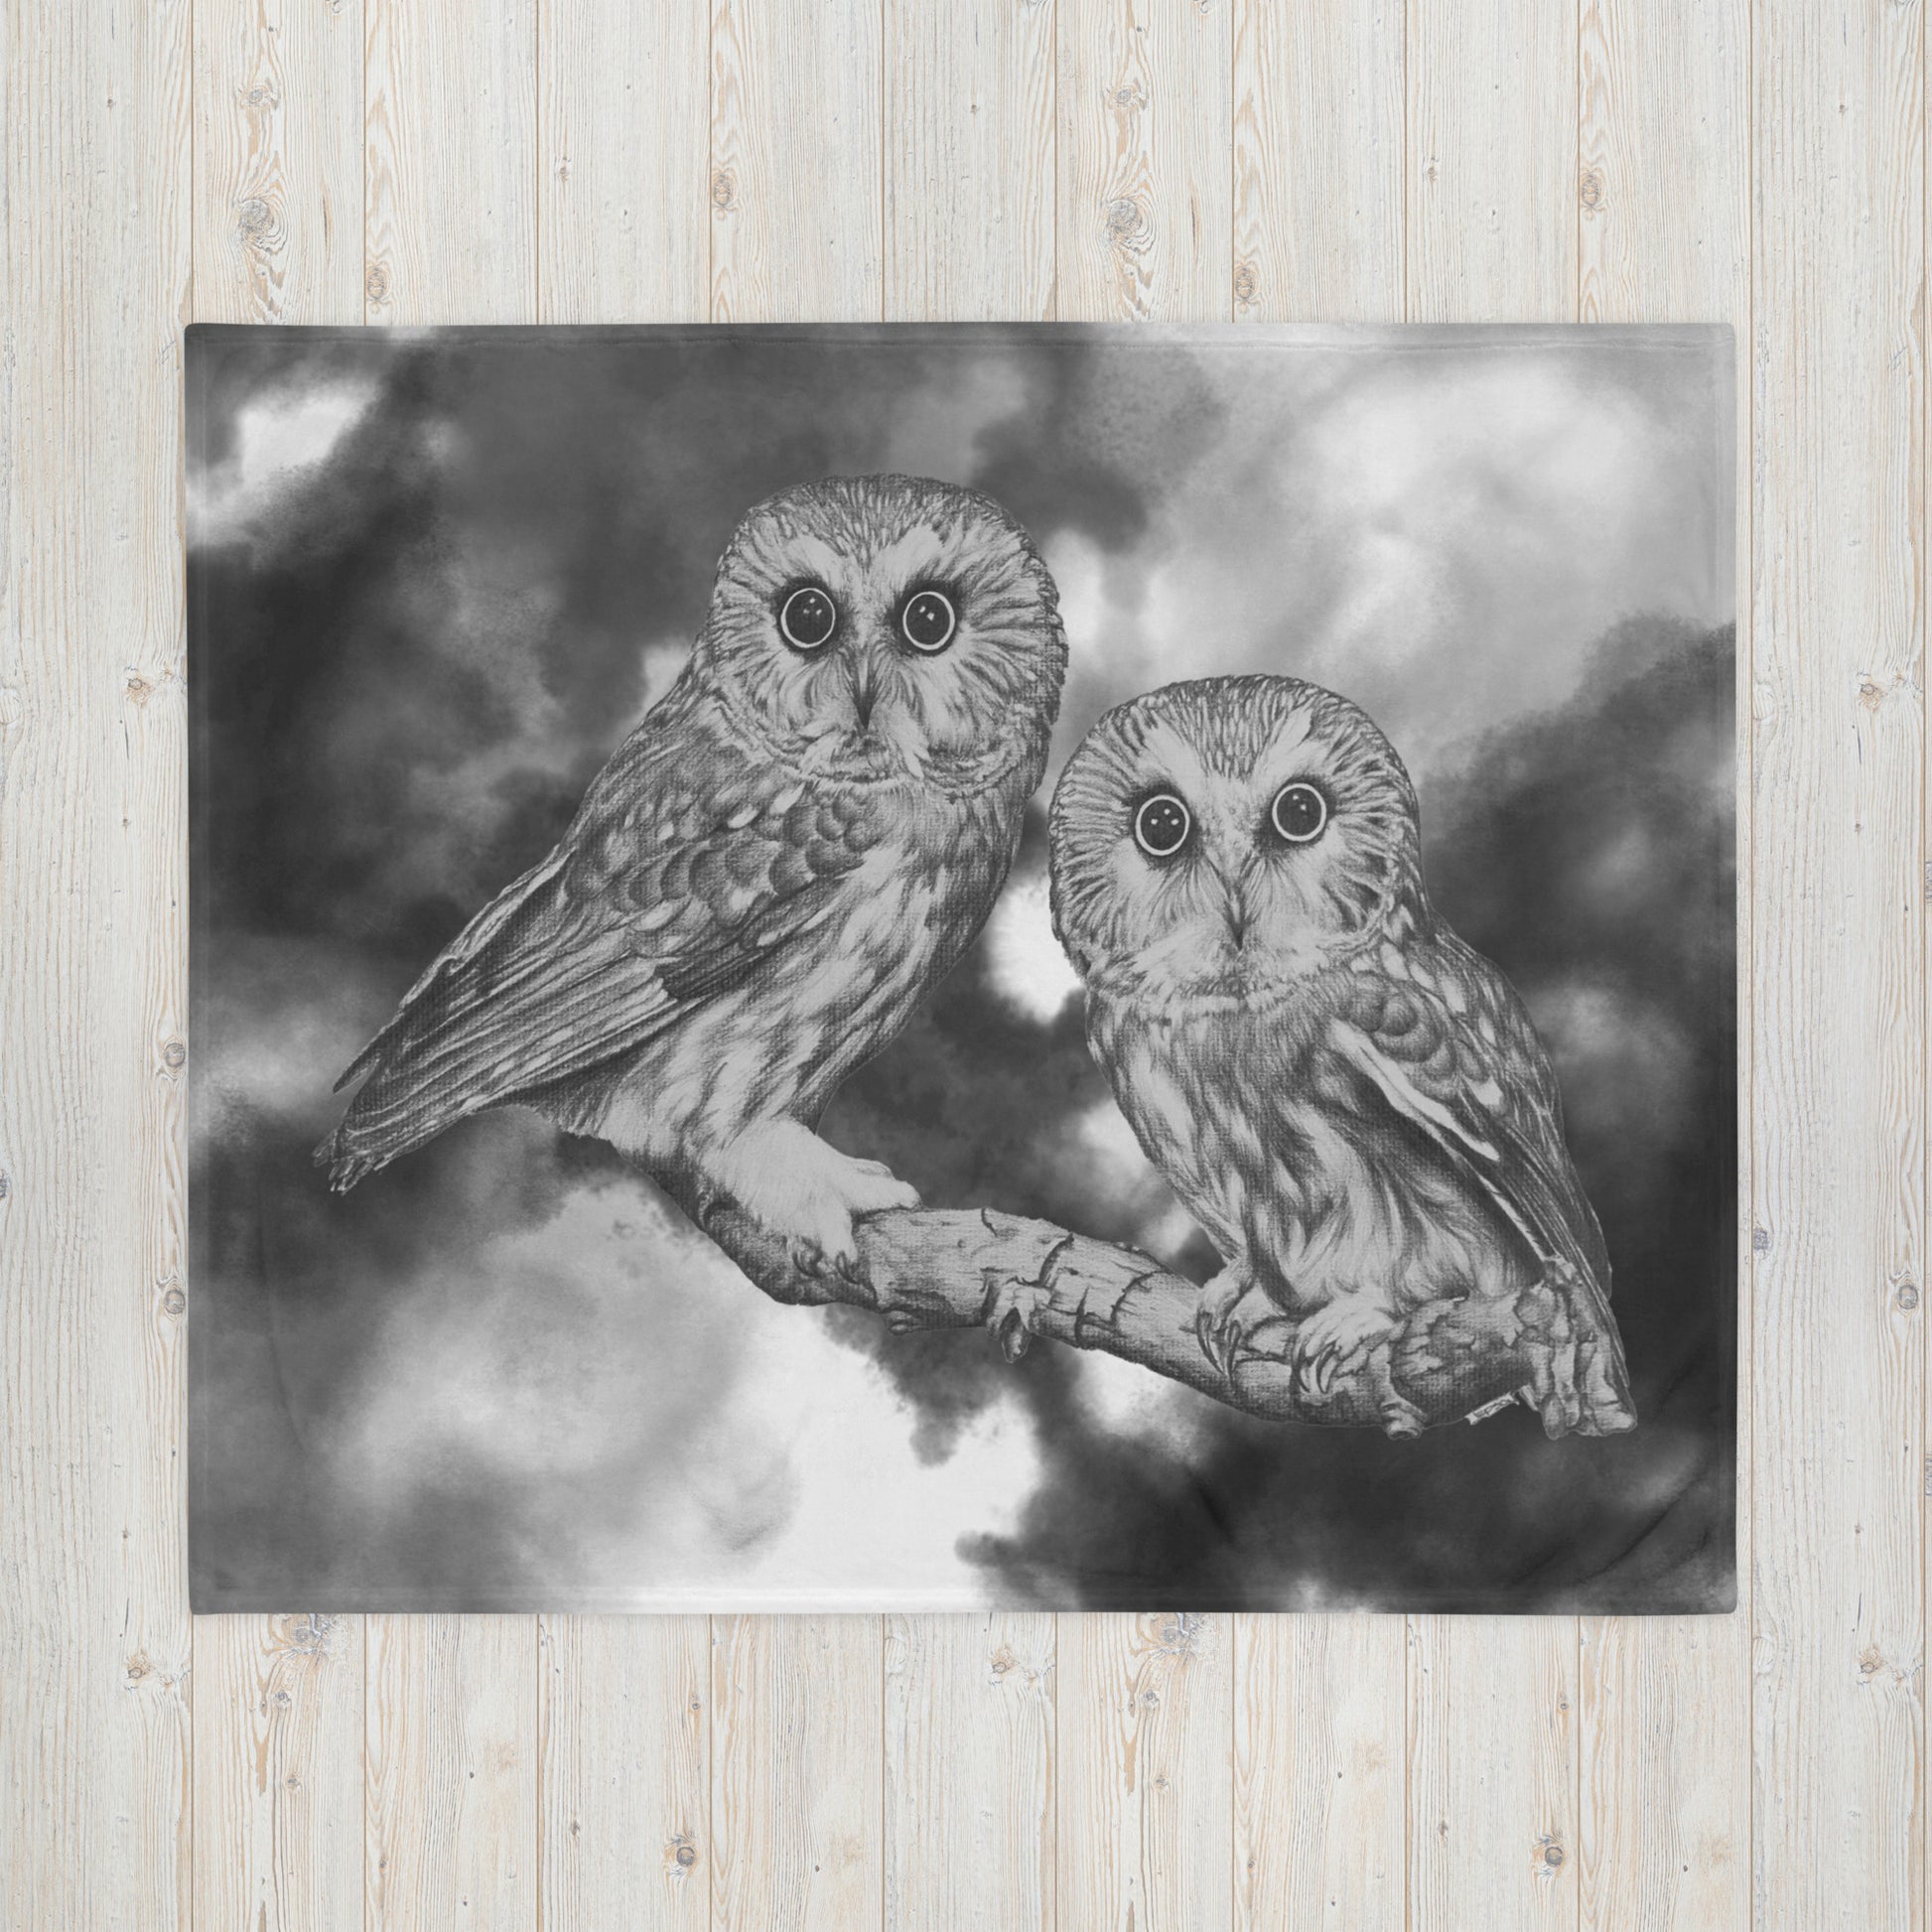 The "Owl Throw Blanket" is of two owls sitting on a branch with a "Who's That" look, drawn with a graphite pencil with a gray and white cloud effect added to give it a dynamic look.